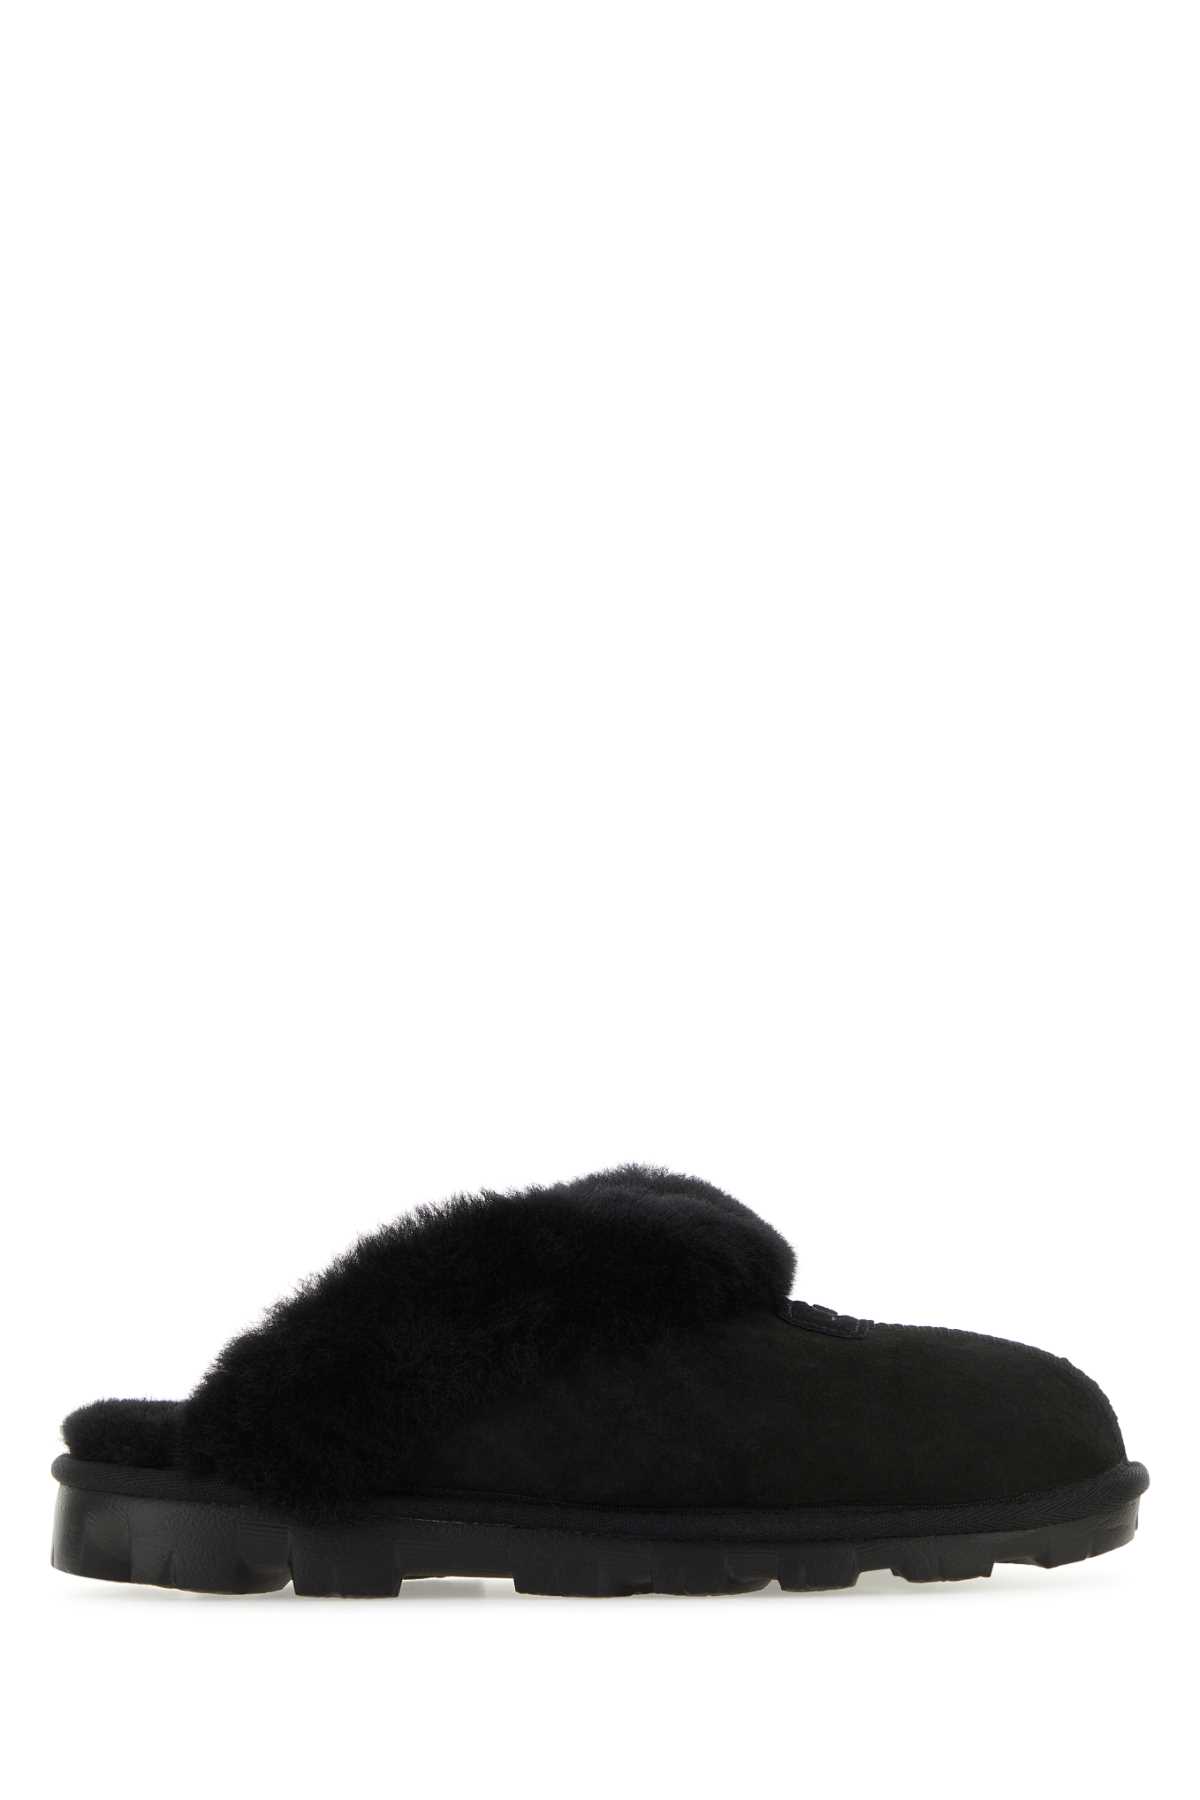 Black Suede Coquette Slippers